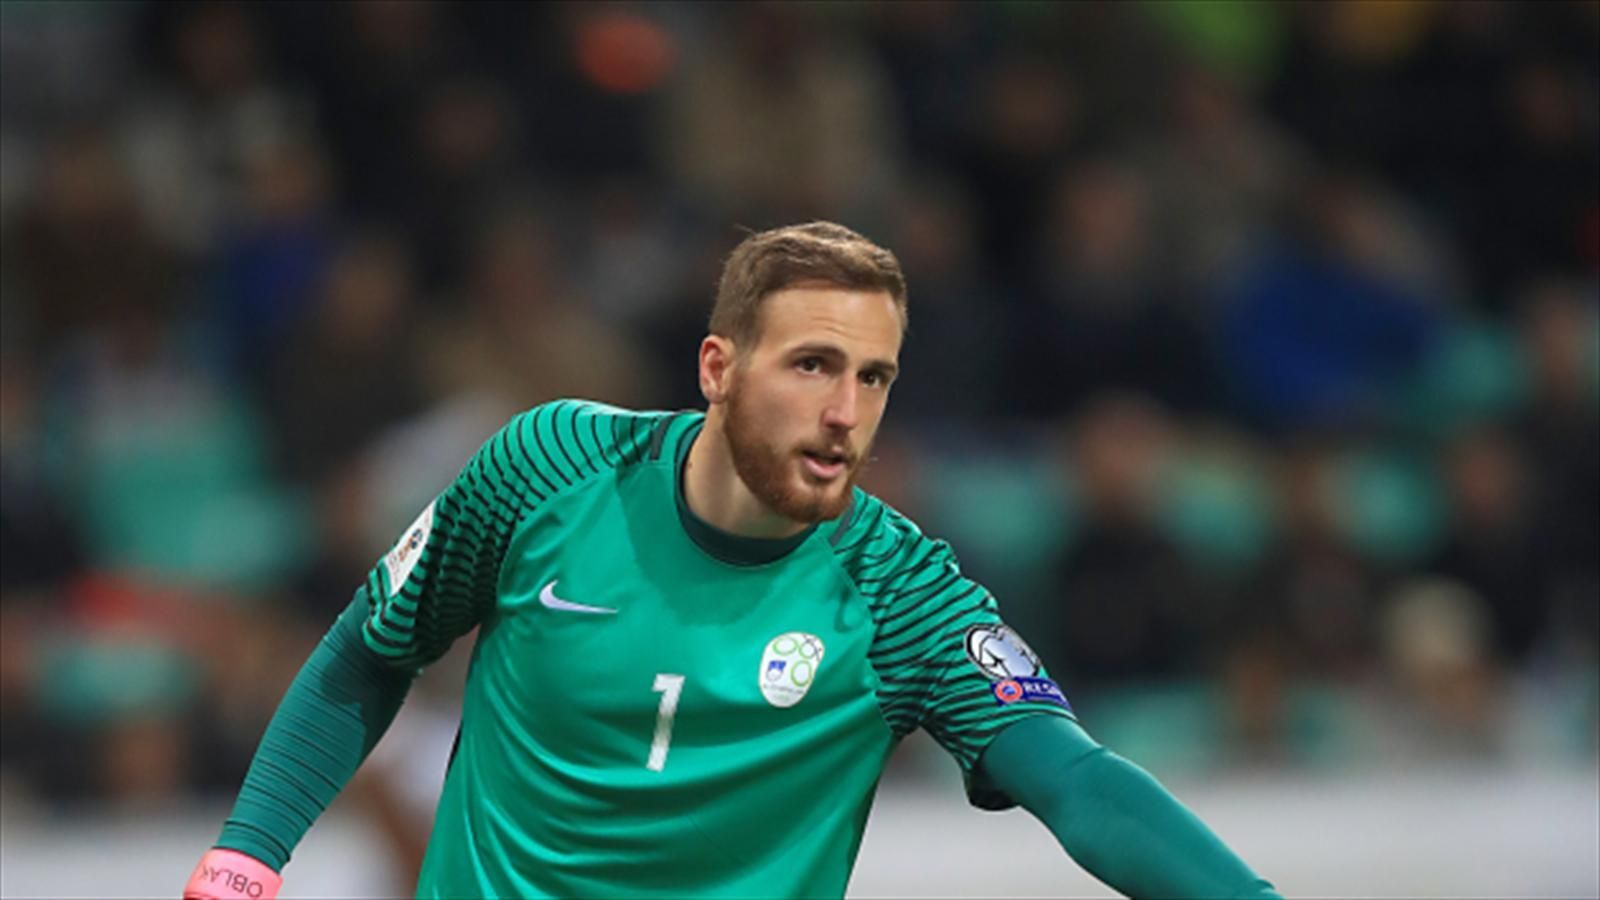 Oblak Shatters a New Record Goalkeeping for Atletico Madrid against Osasuna